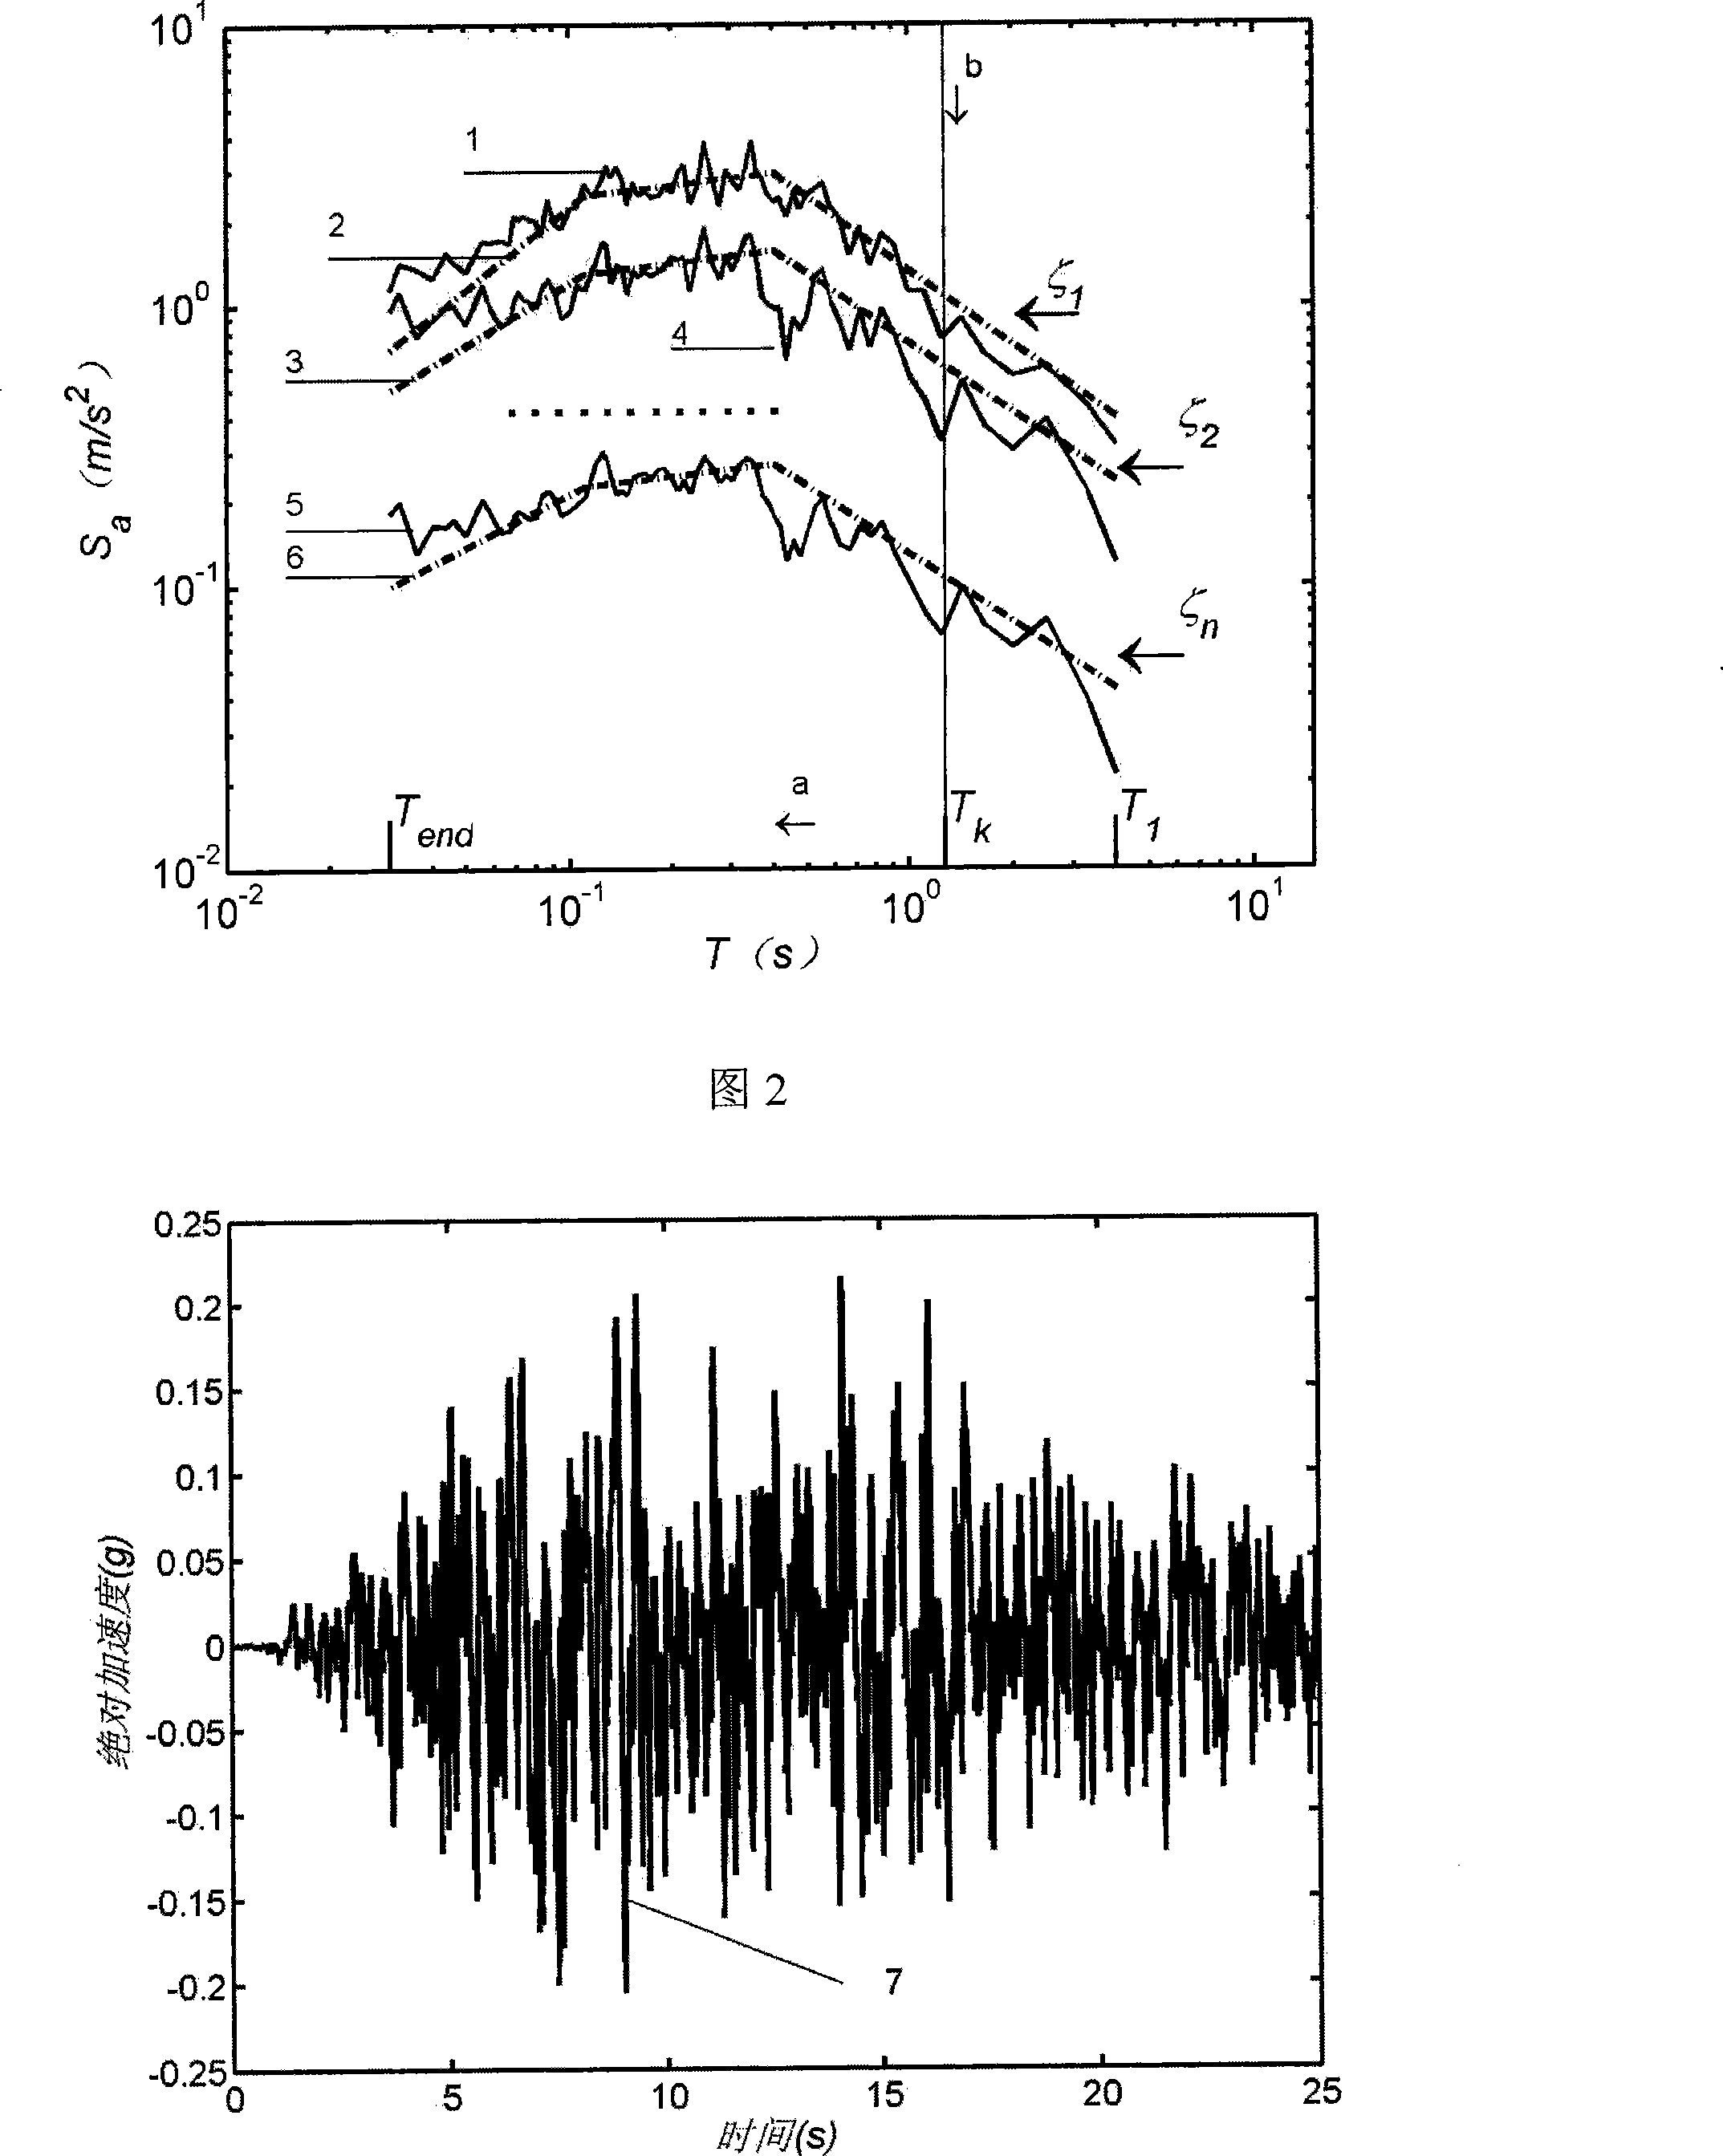 Multi- damping ratio goal response spectrum compatible artificial earthquake wave synthesis method